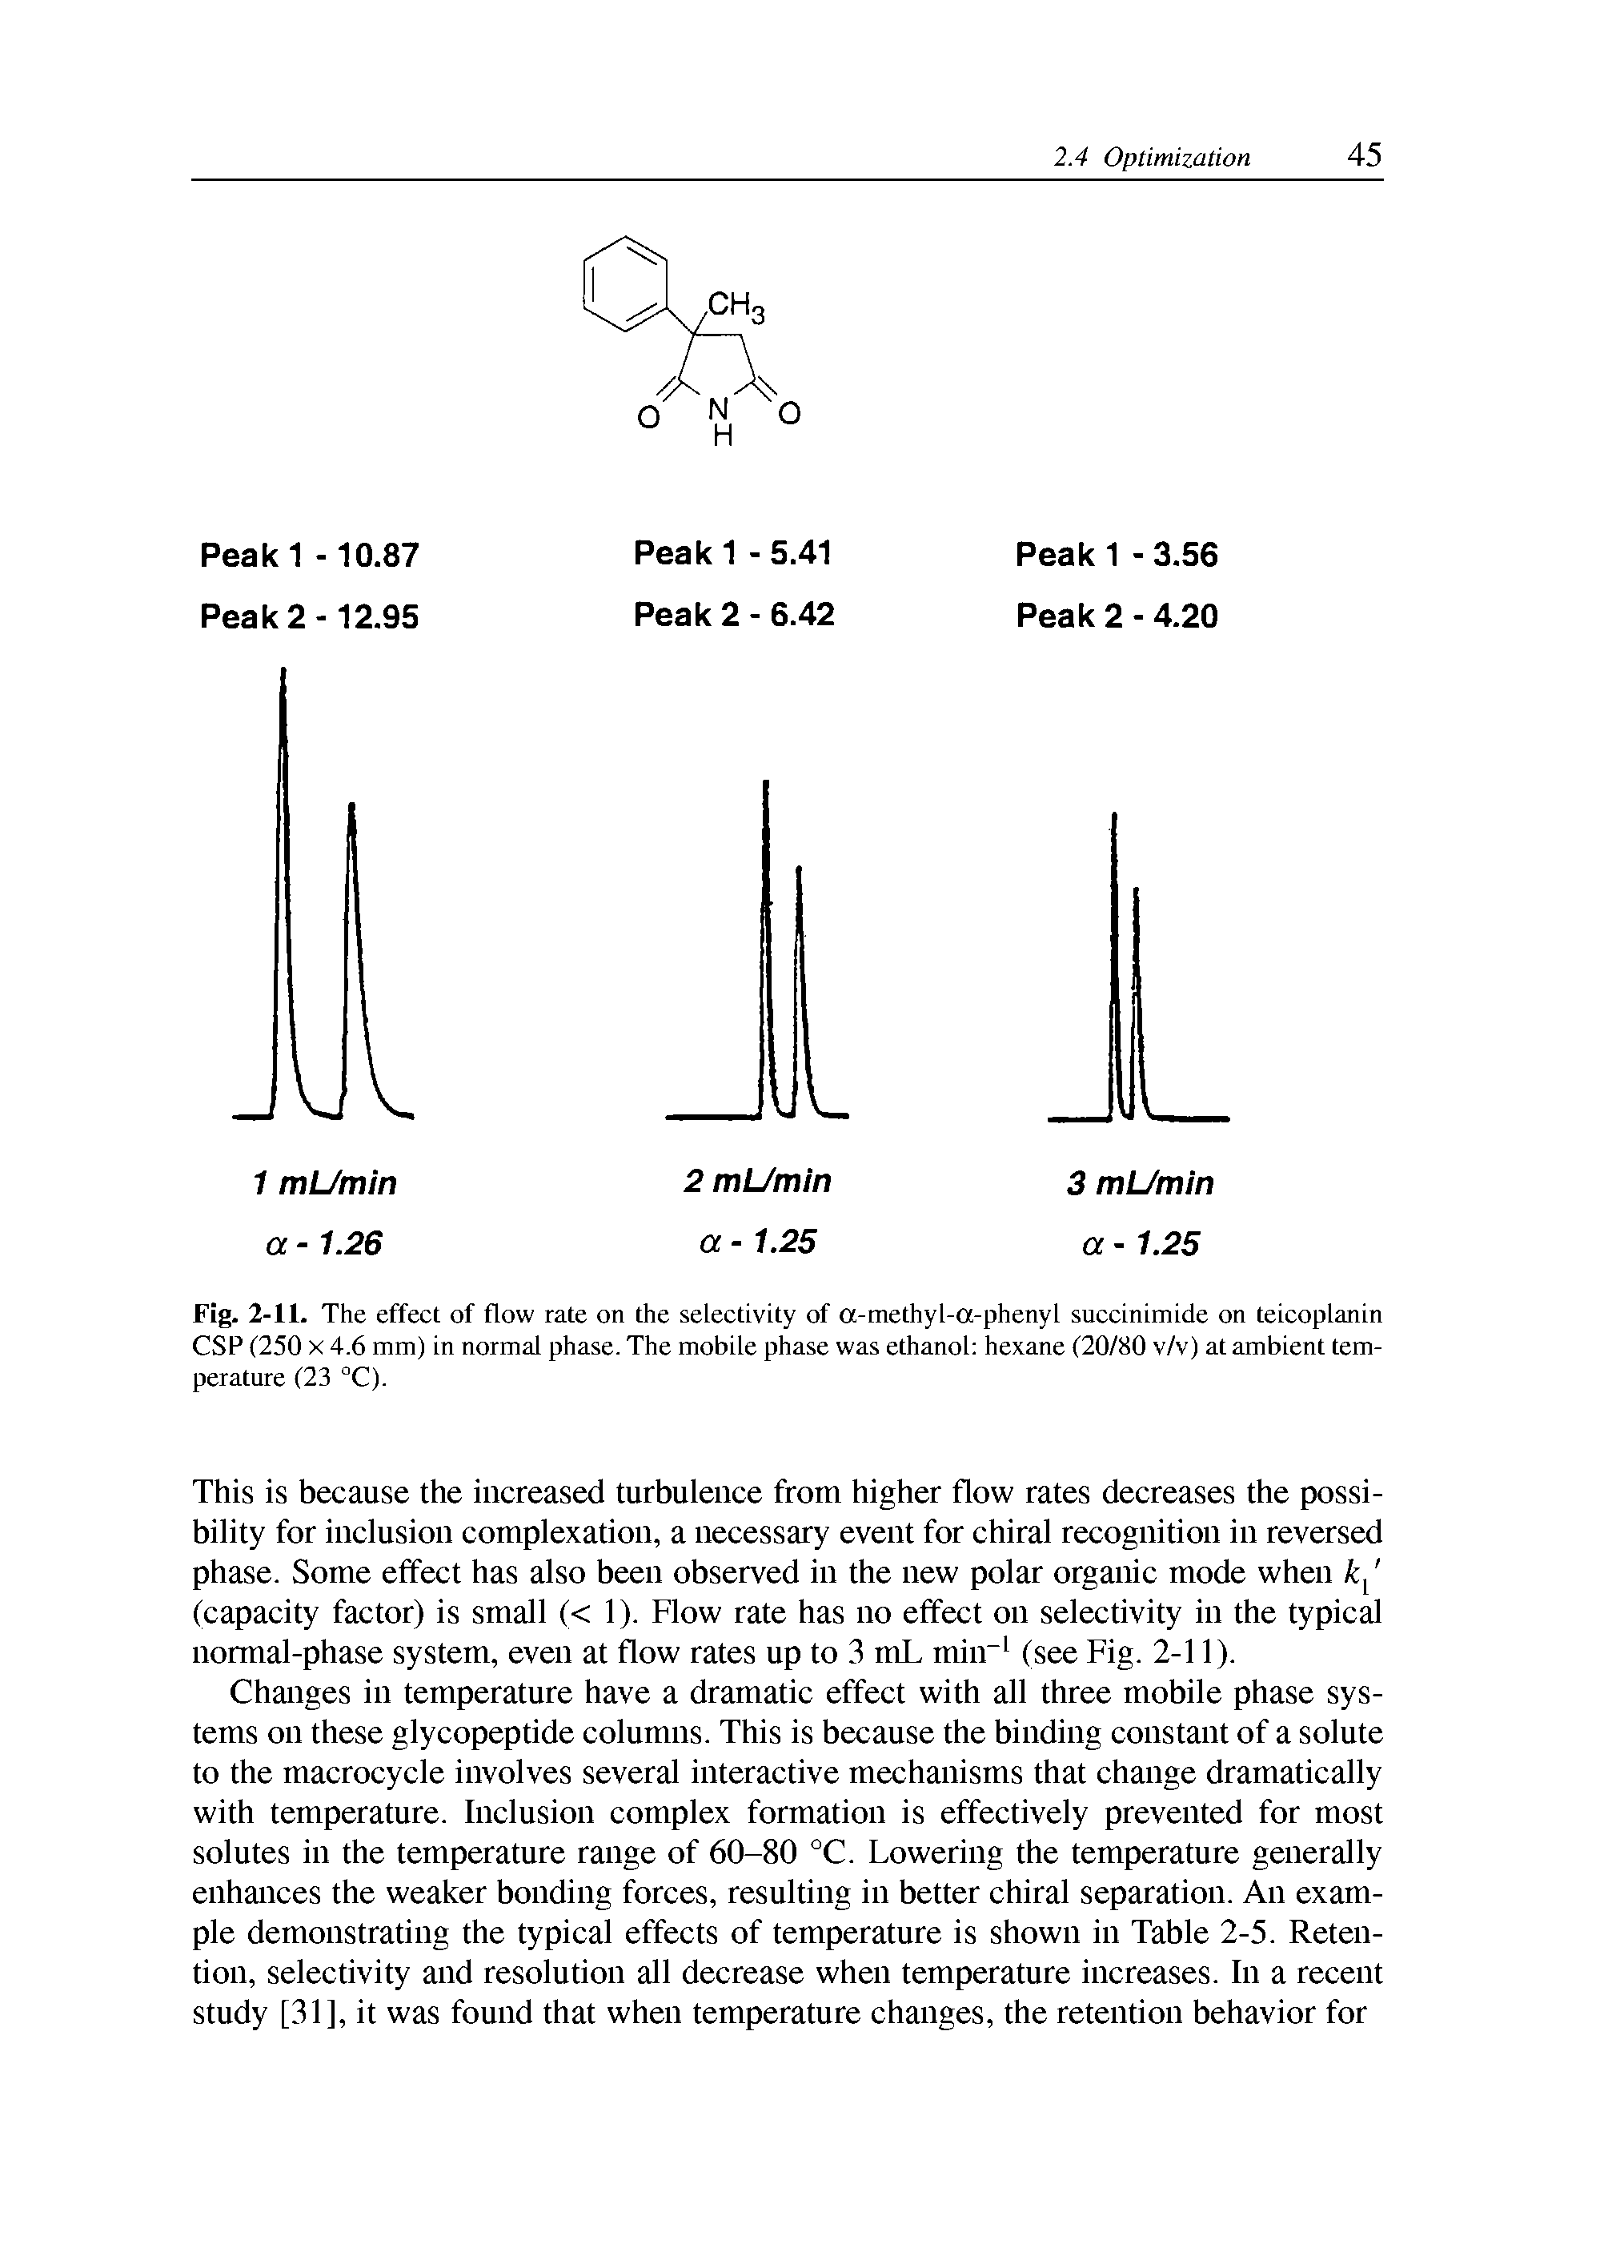 Fig. 2-11. The effect of flow rate on the selectivity of a-methyl-a-phenyl succinimide on teicoplanin CSP (250 X 4.6 mm) in normal phase. The mobile phase was ethanol hexane (20/80 v/v) at ambient temperature (23 °C).